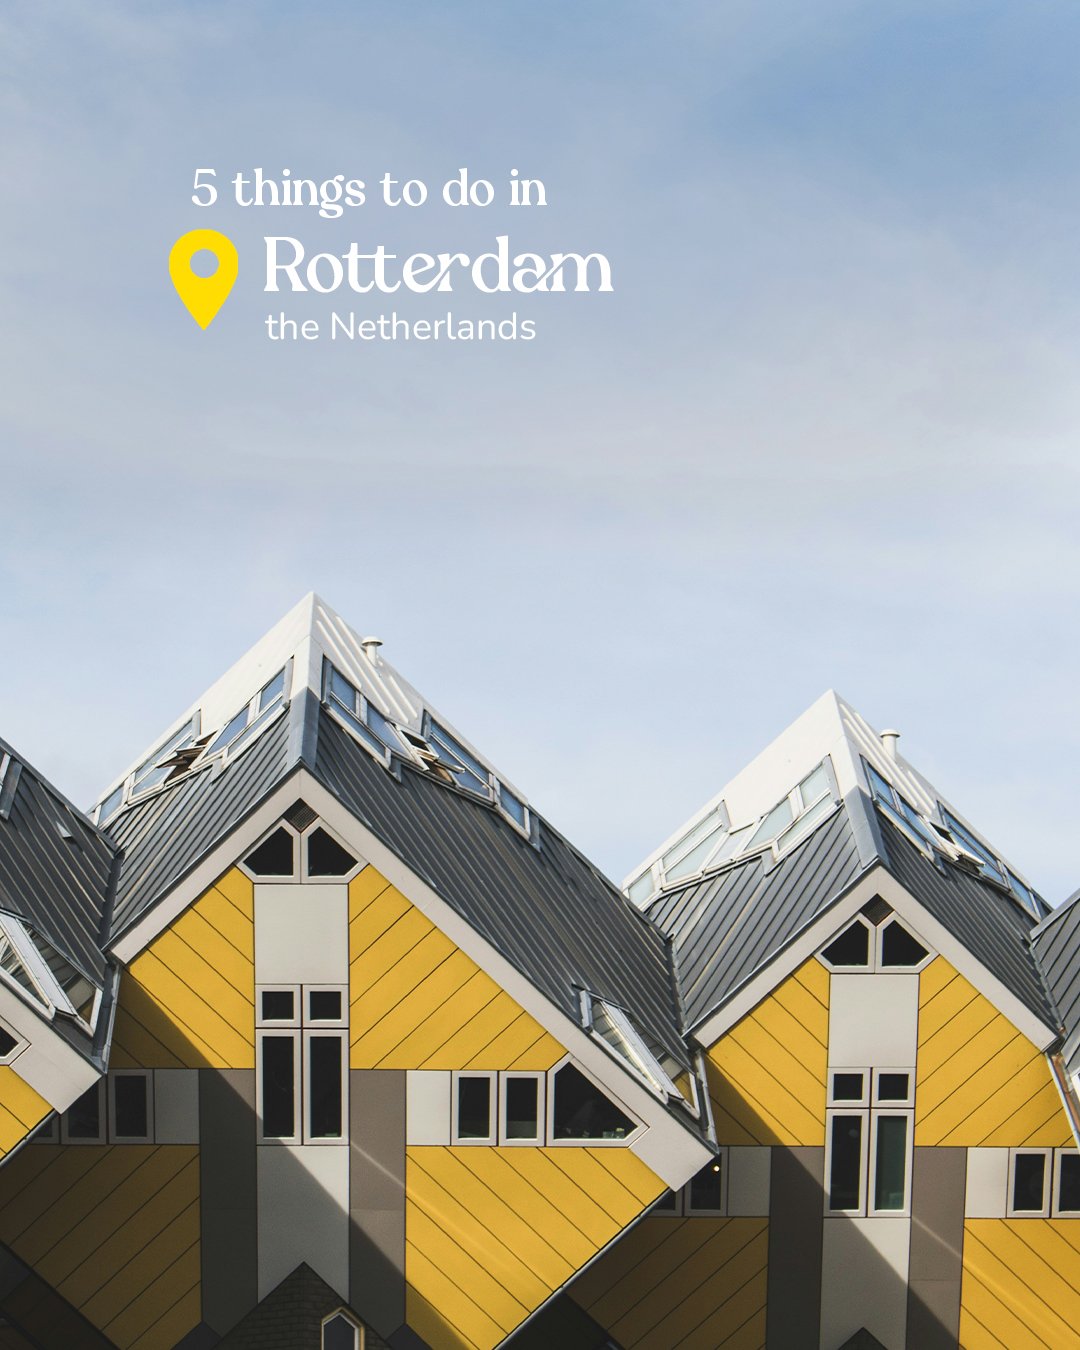 Easily reachable from London by train, or a snooze on a sleeper ferry from Harwich, lie the green and glassy landscapes of Rotterdam in the Netherlands. 

A haven of sustainable architecture - brimming with coffee shops, markets, avant-garde artworks